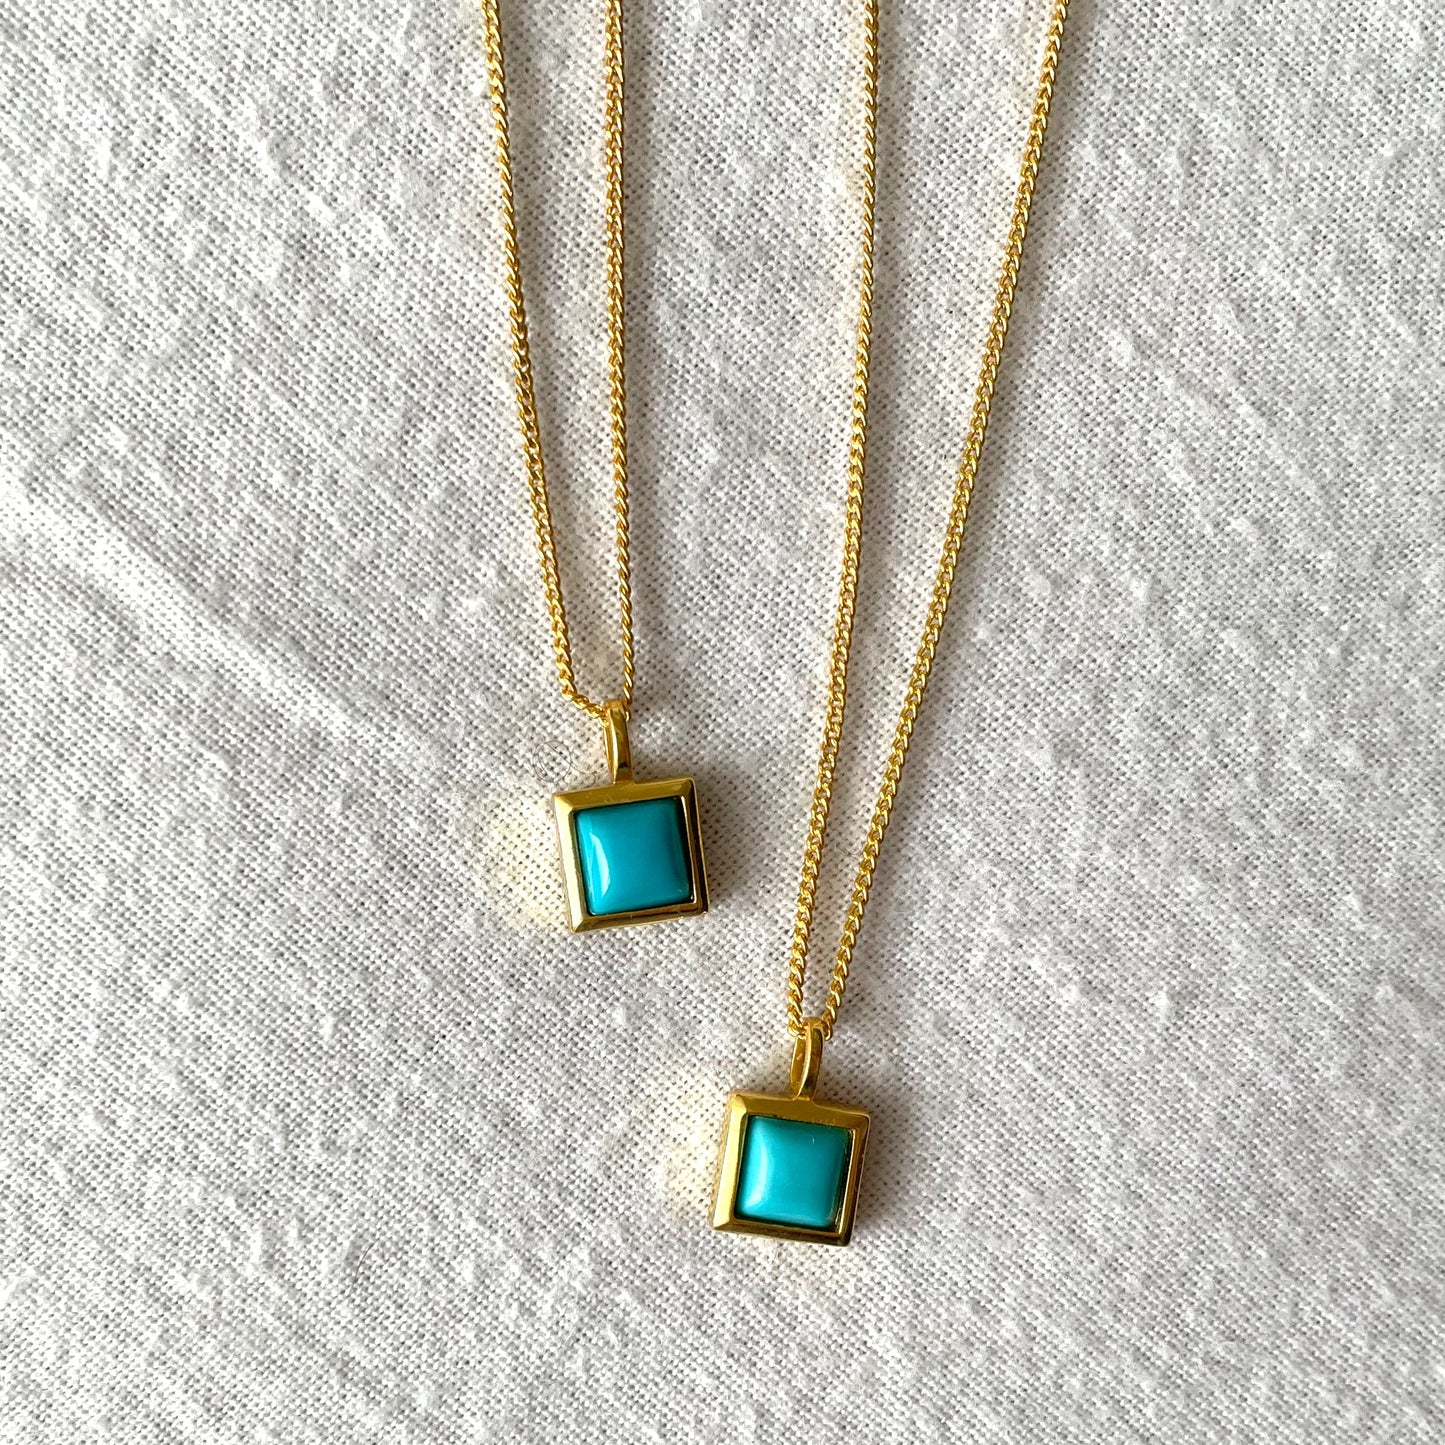 Turquoise Gold Necklace, Crystal gemstone necklace, Gold Plated on 925 Sterling Silver, handmade necklace, Turquoise necklace, Unique Gift, turquoise, gemstones, gold studs, Crystal, Christmas gift ideas, small business, london, dainty necklace